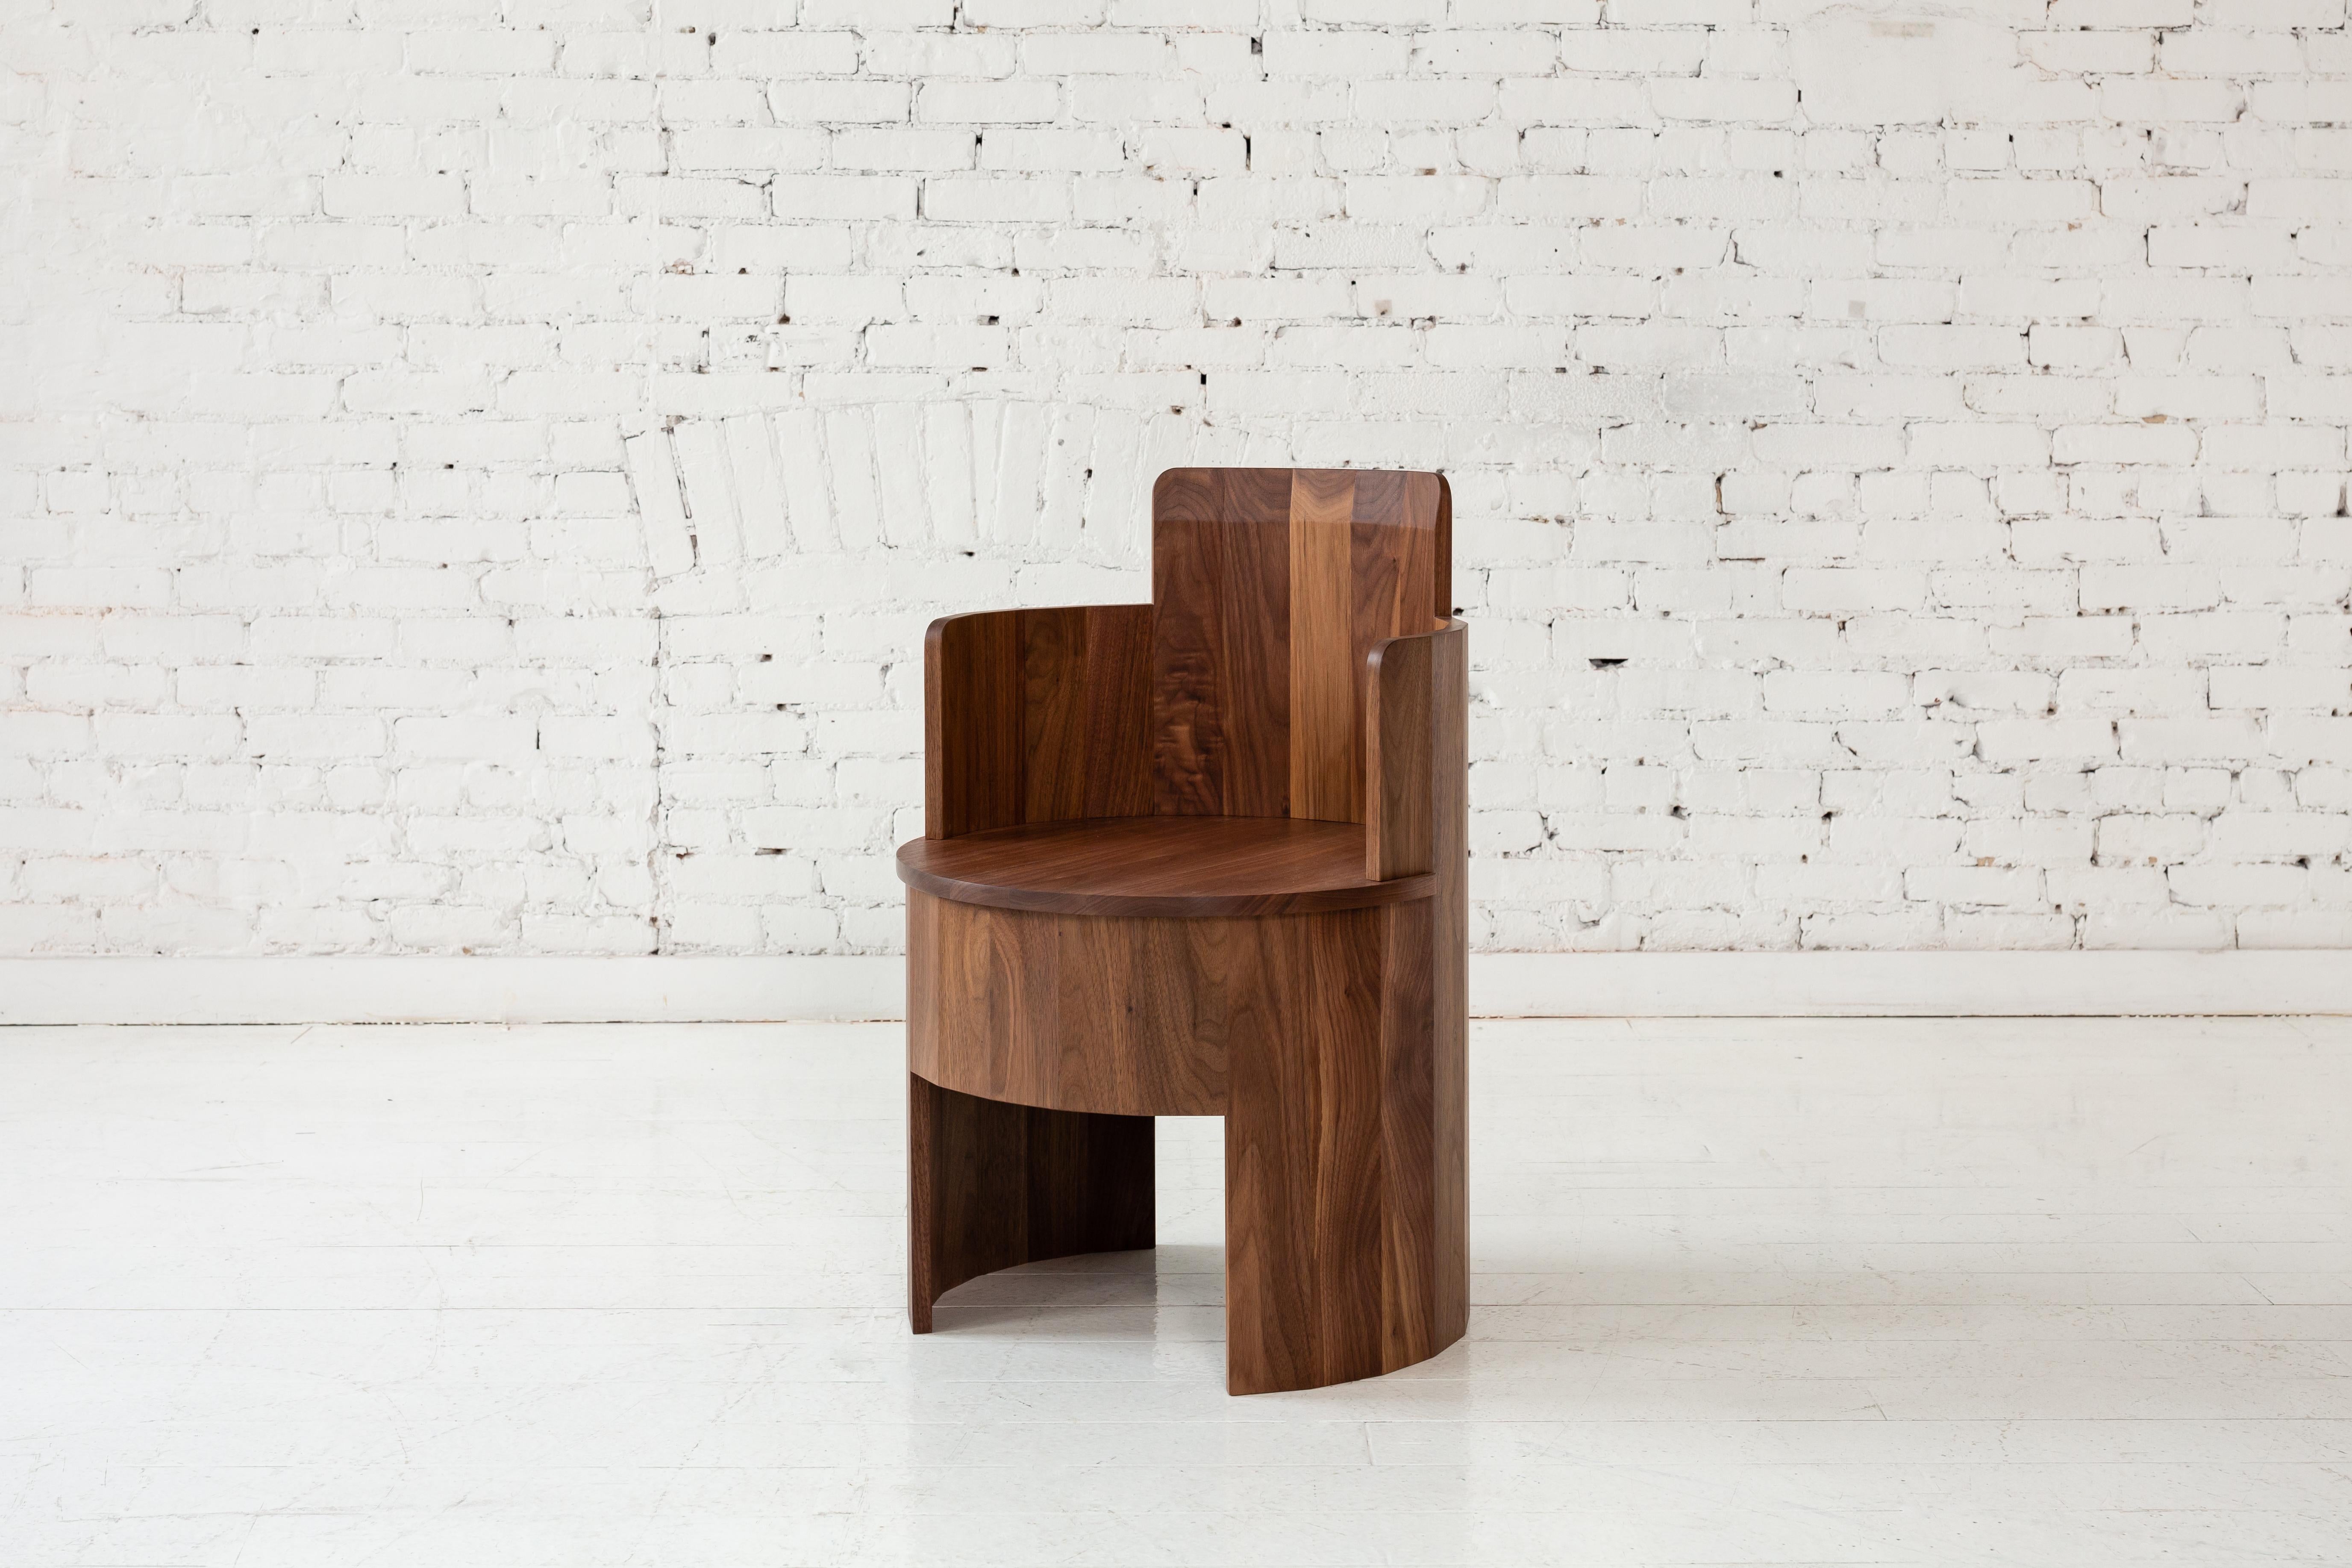 This wood side chair is a part of the new Cooperage Dining collection. Each piece features large faceted round elements that with its namesake reference the traditional cooper's trade of making barrels.

The occasional chair table is shown in